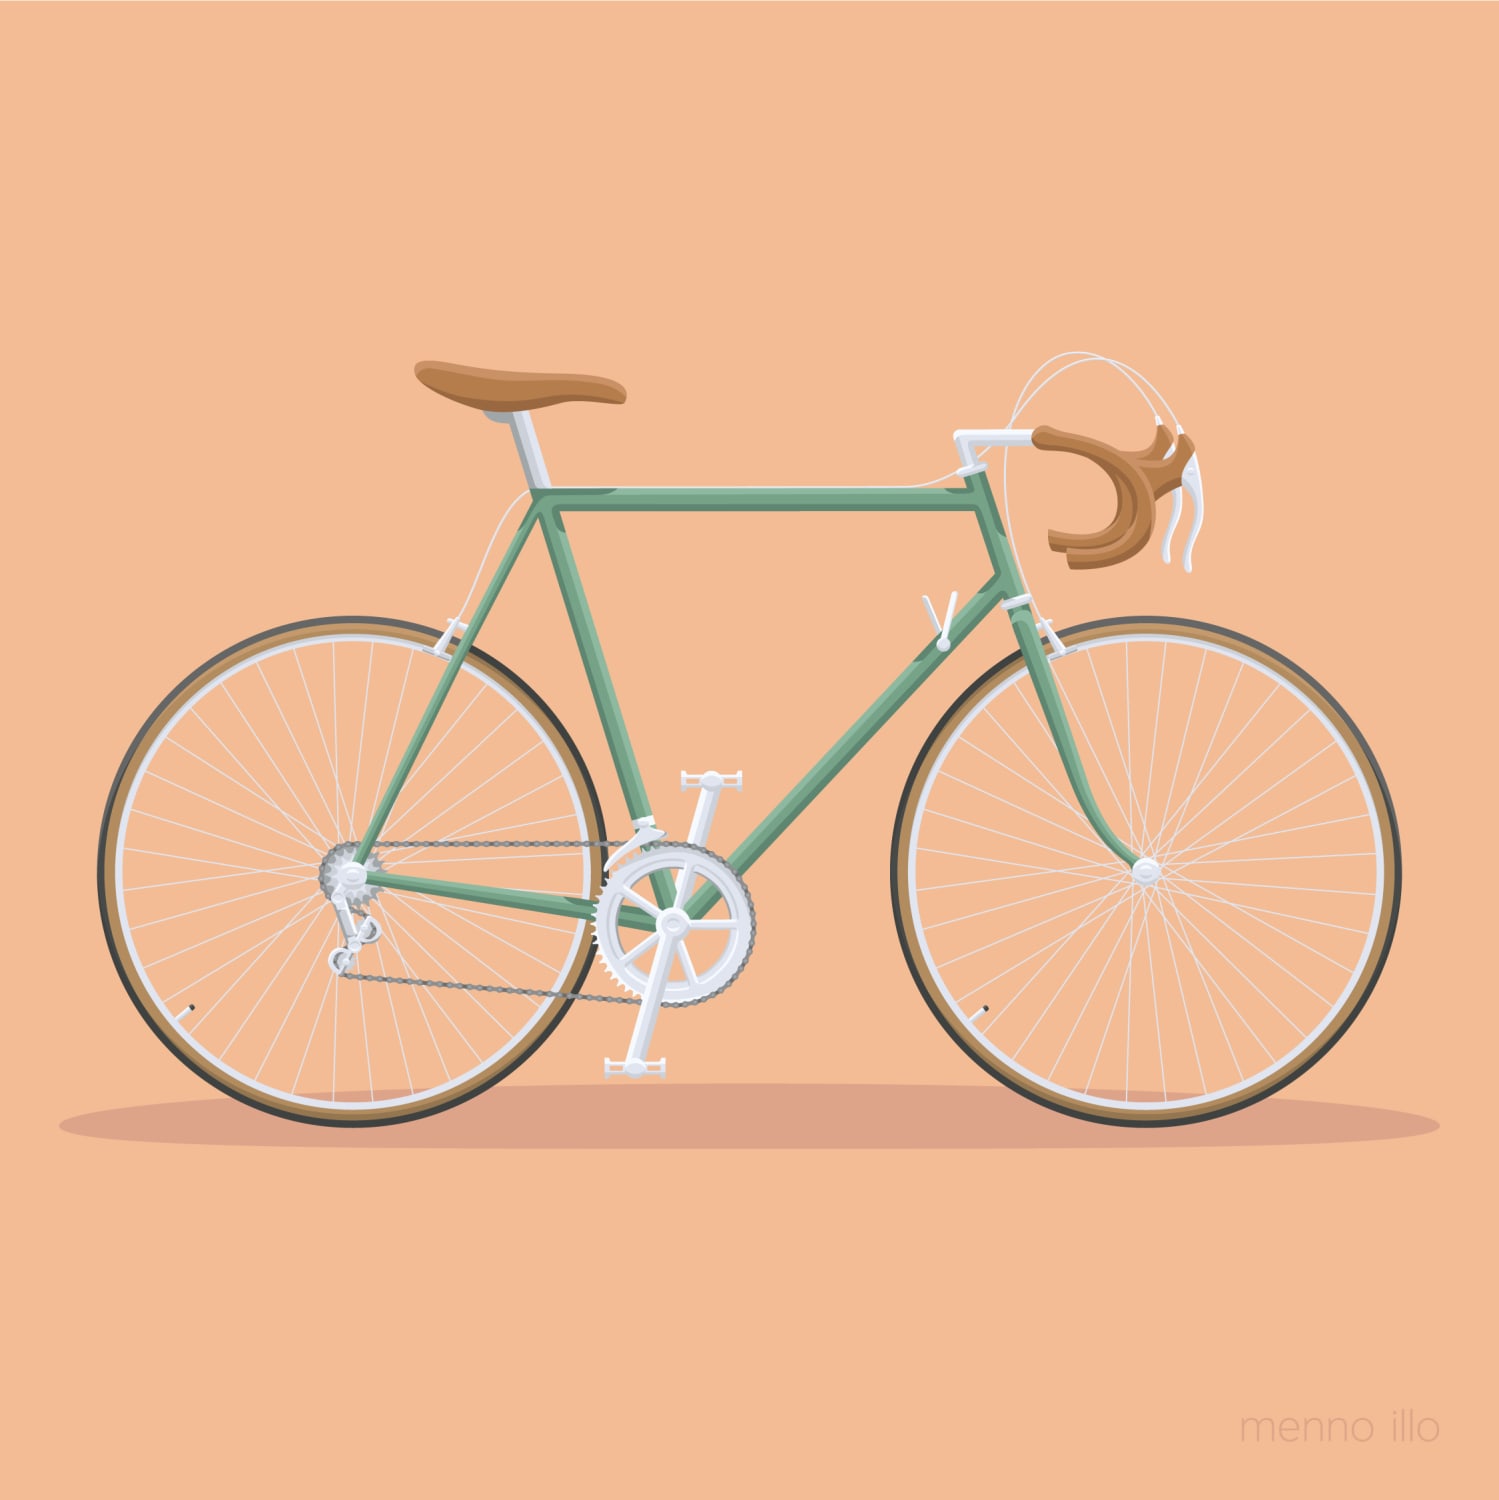 I made a classic bicycle in Adobe Illustrator